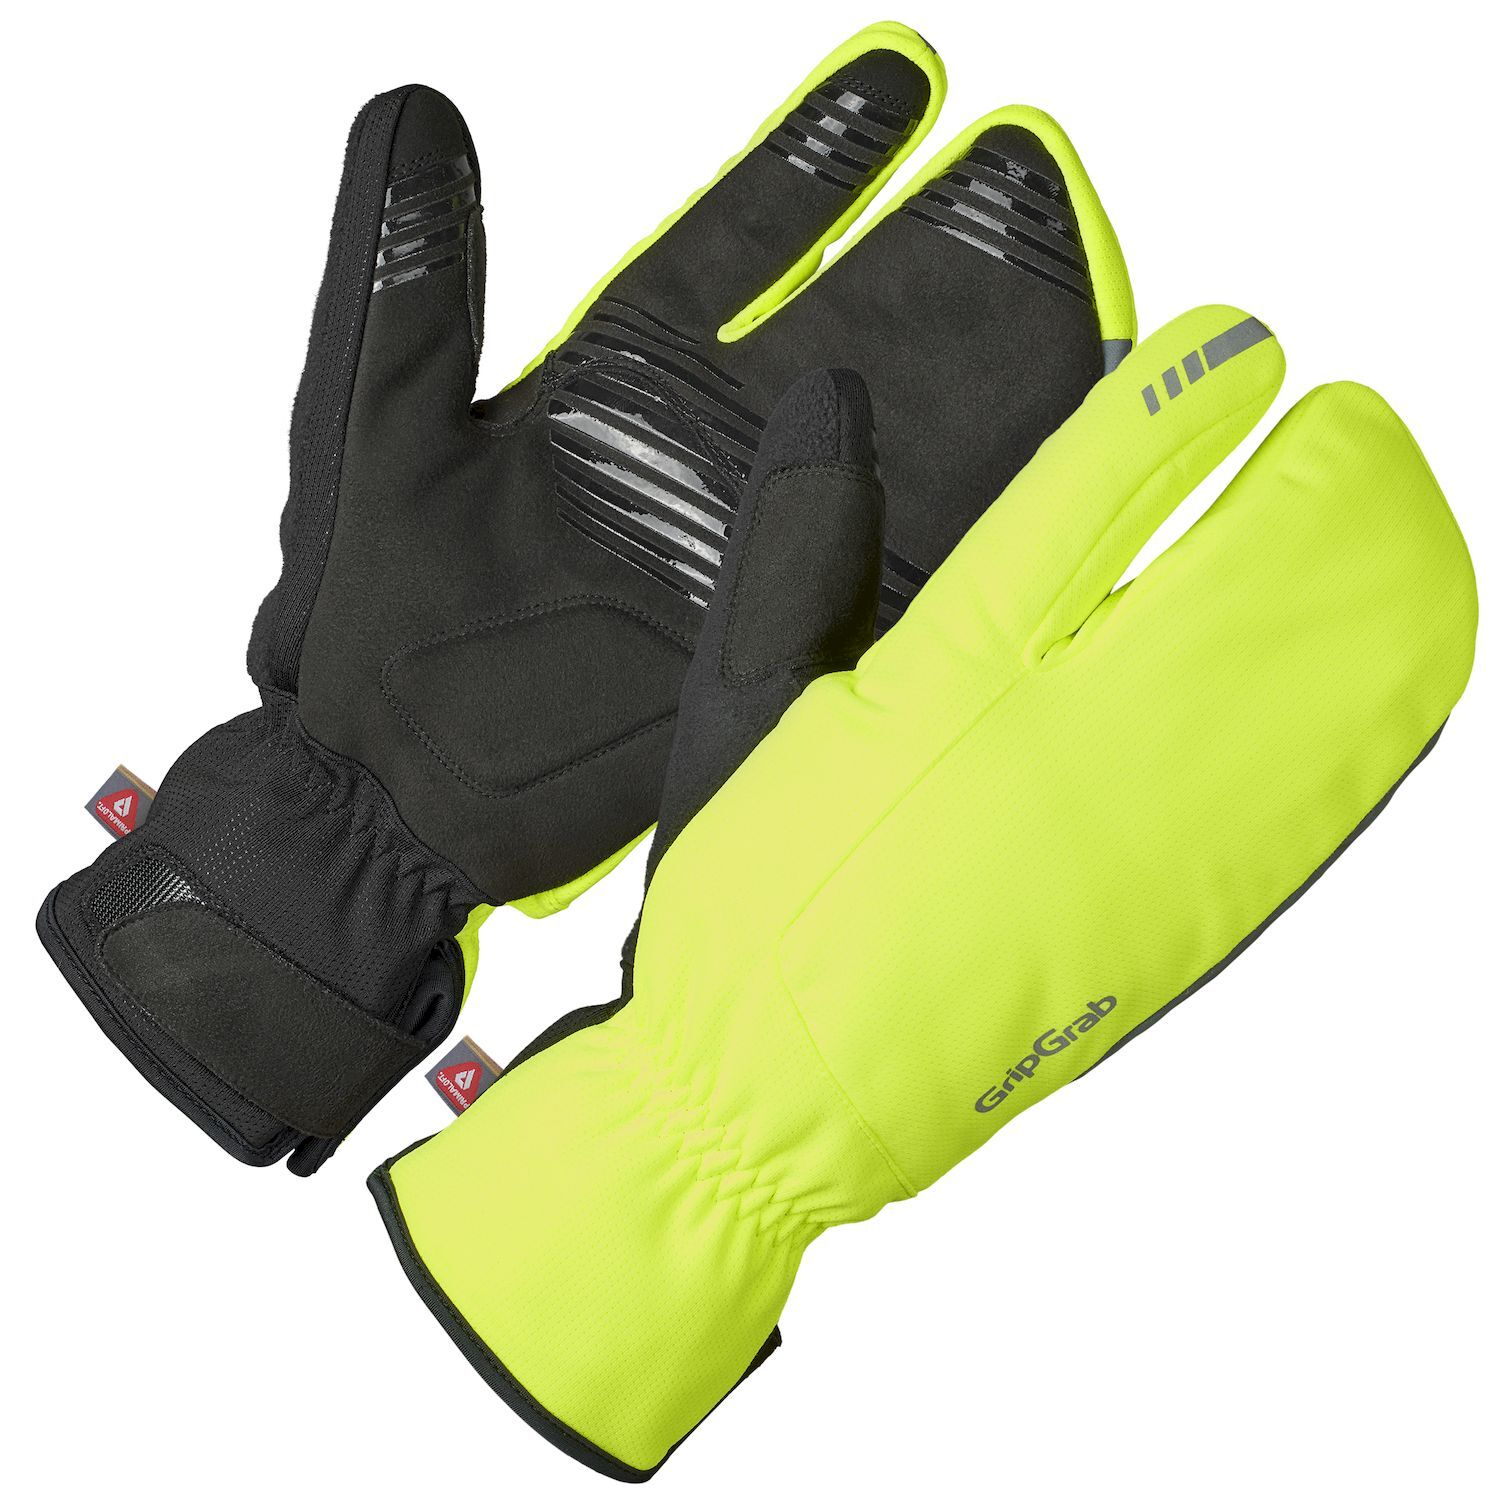 GripGrab Nordic 2 Windproof Deep Winter Lobster Gloves - Cycling gloves